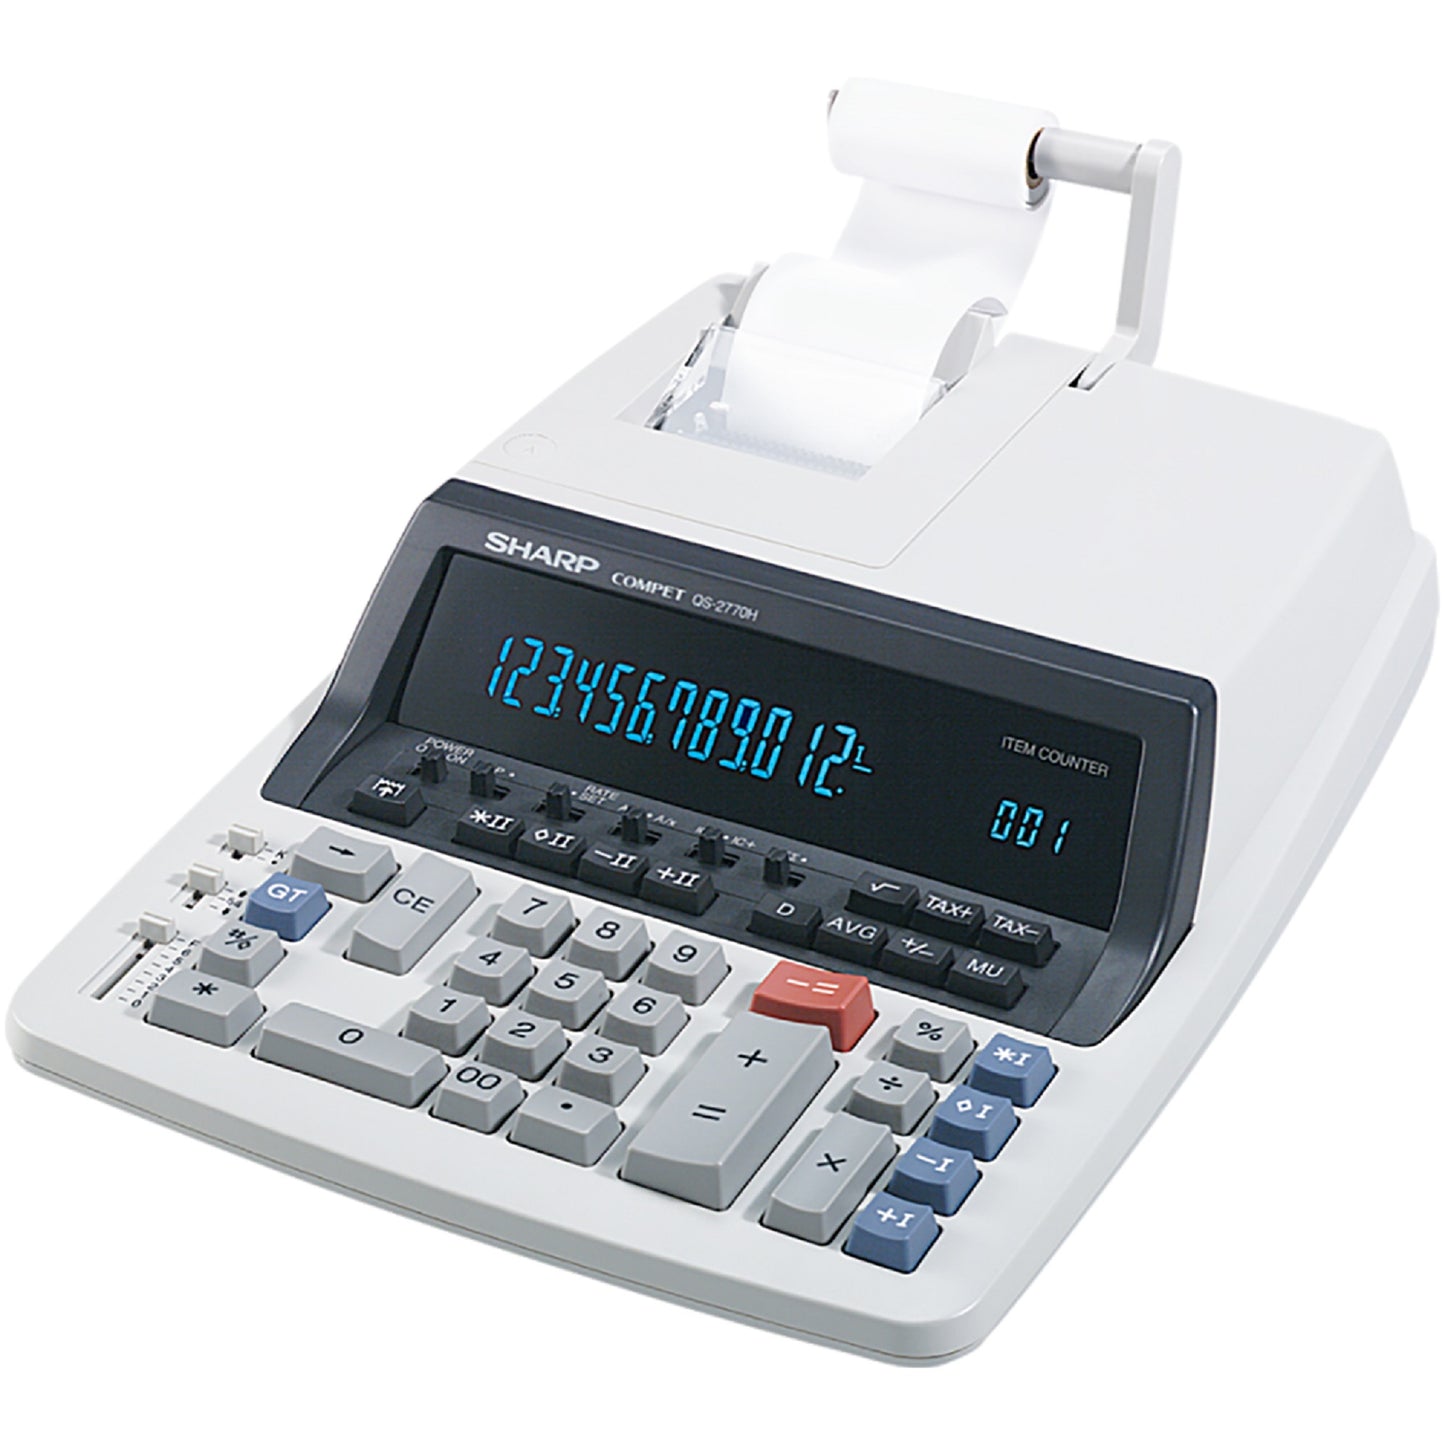 heavy duty printing calculator with sculpted keys, extra memory functions, and selectable setting switches